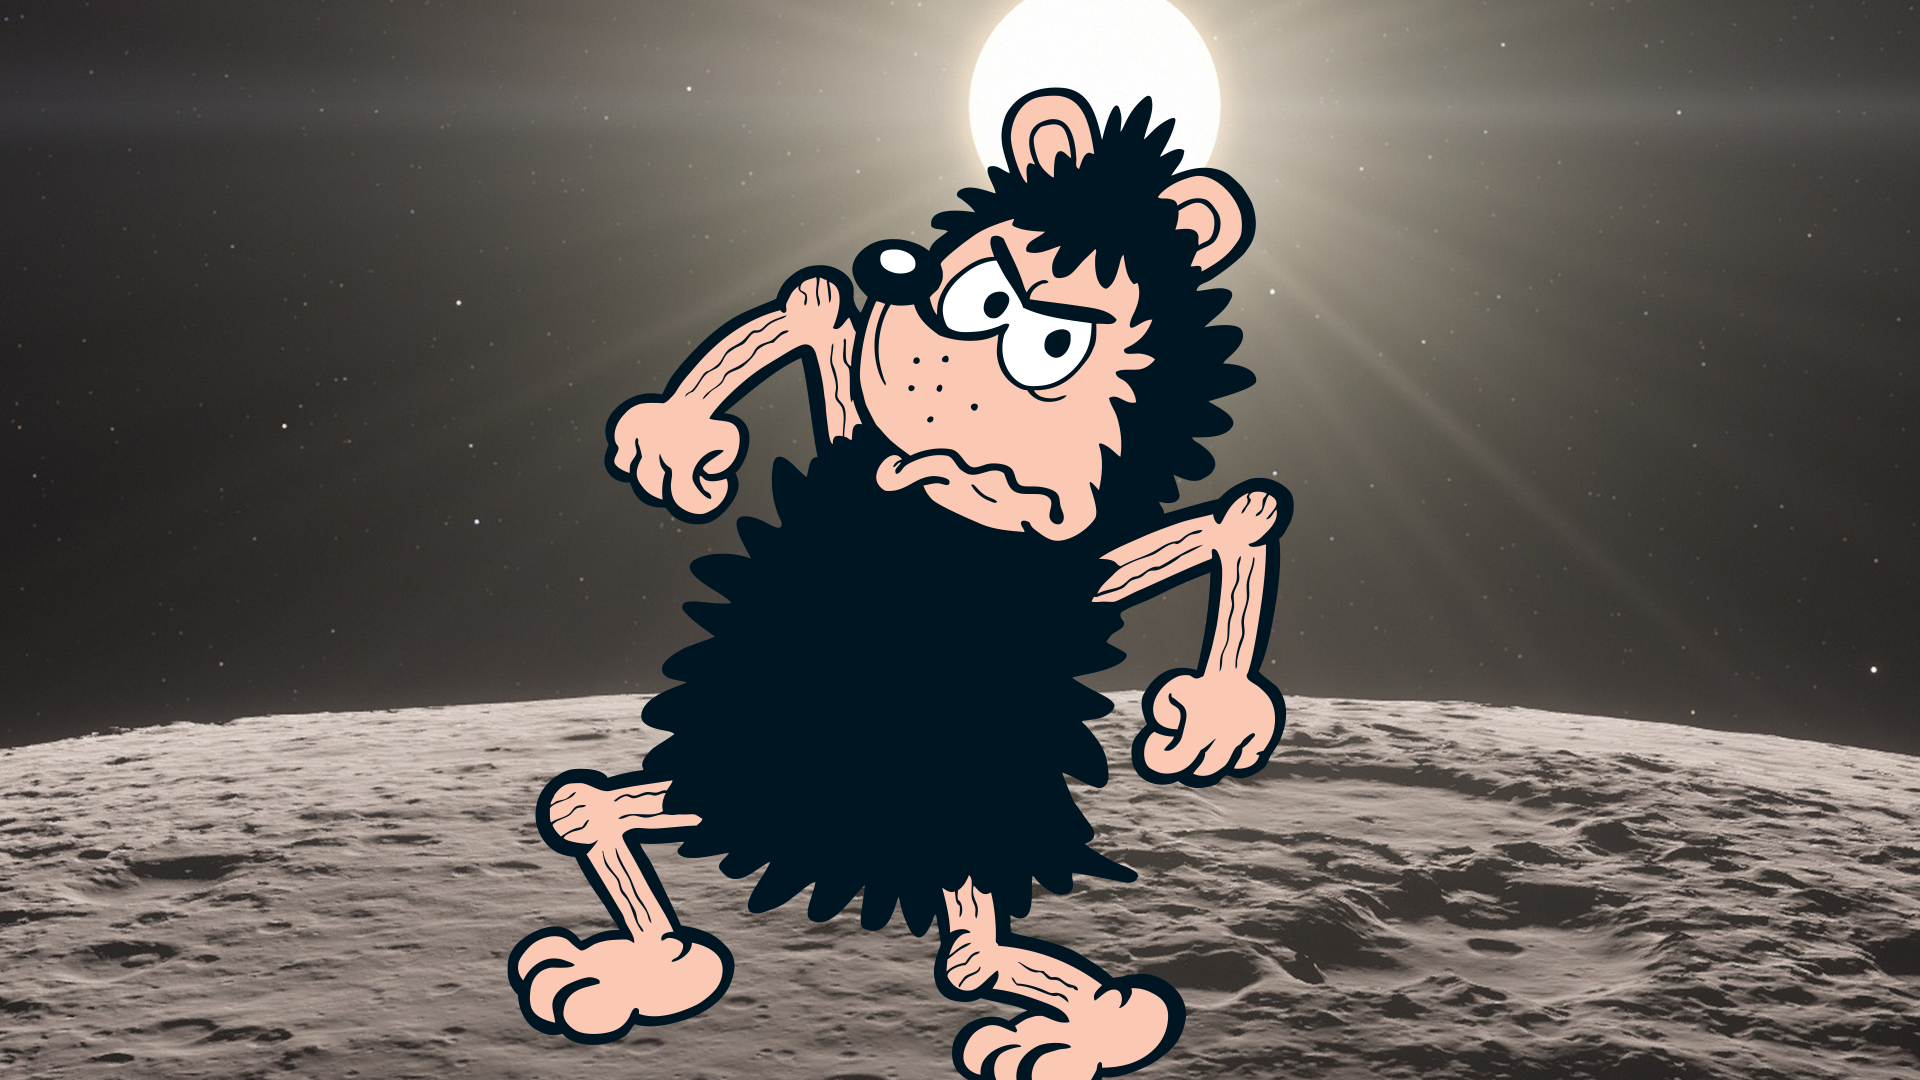 Gnasher on the moon